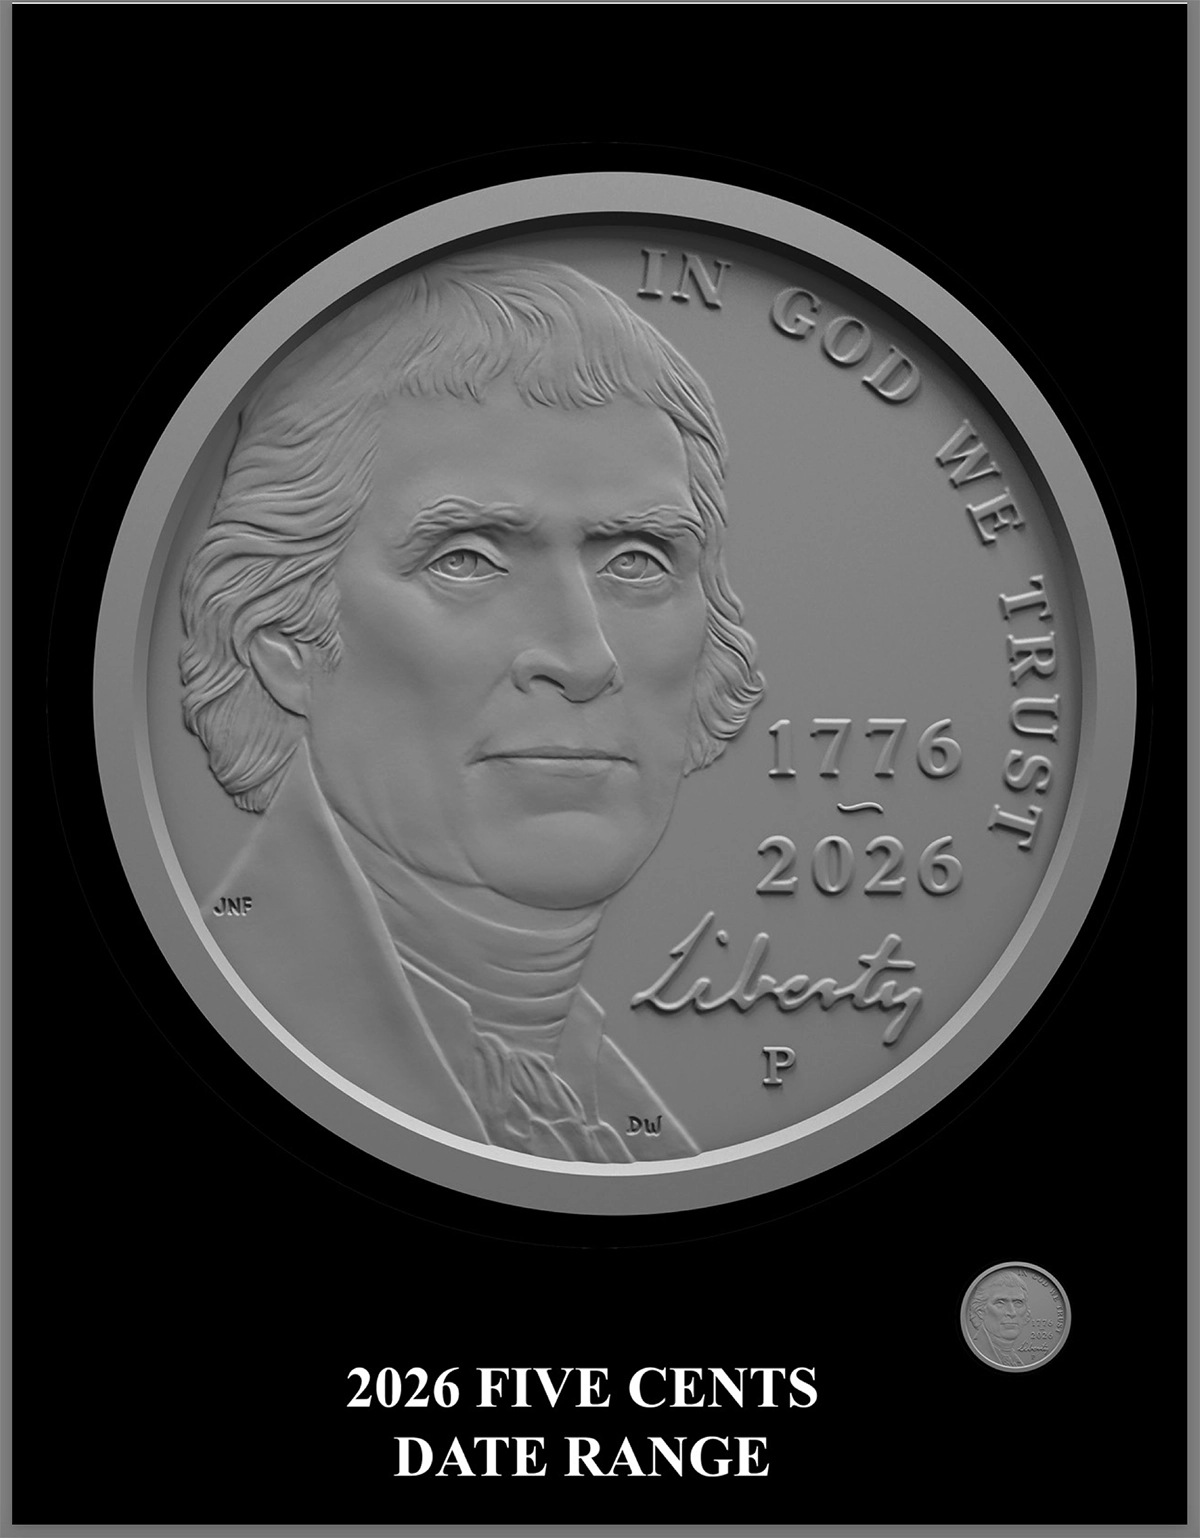 The CFA chose this design for the 2026 Jefferson nickel.